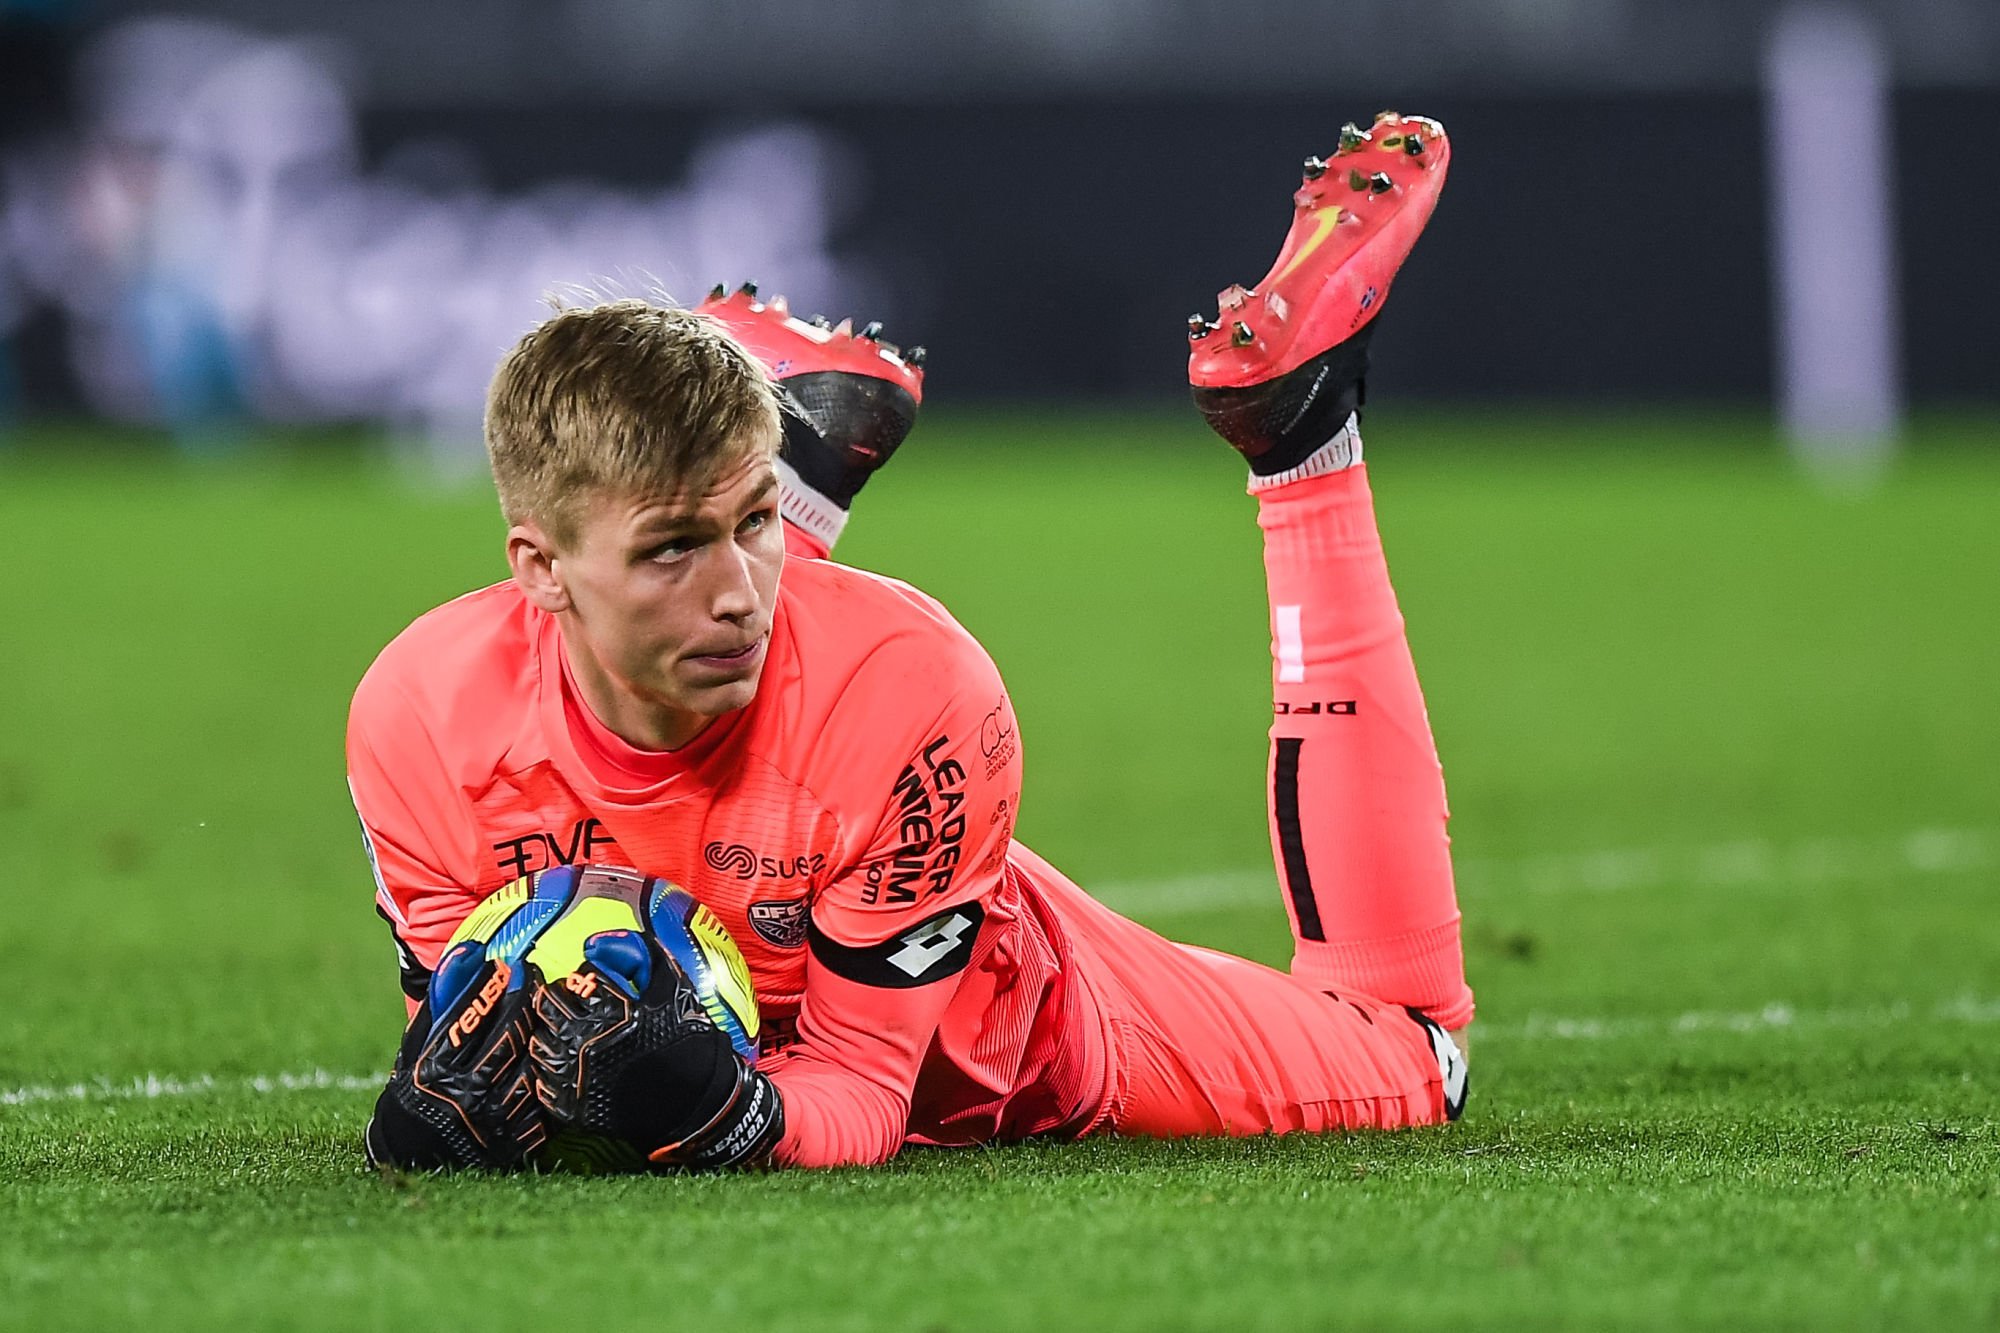 Runar Alex RUNARSSON of Dijon during the French Ligue 1 Soccer match between Bordeaux and Dijon at Stade Matmut Atlantique on February 15, 2020 in Bordeaux, France. (Photo by Baptiste Fernandez/Icon Sport) - Runar Alex RUNARSSON - Matmut ATLANTIQUE - Bordeaux (France)